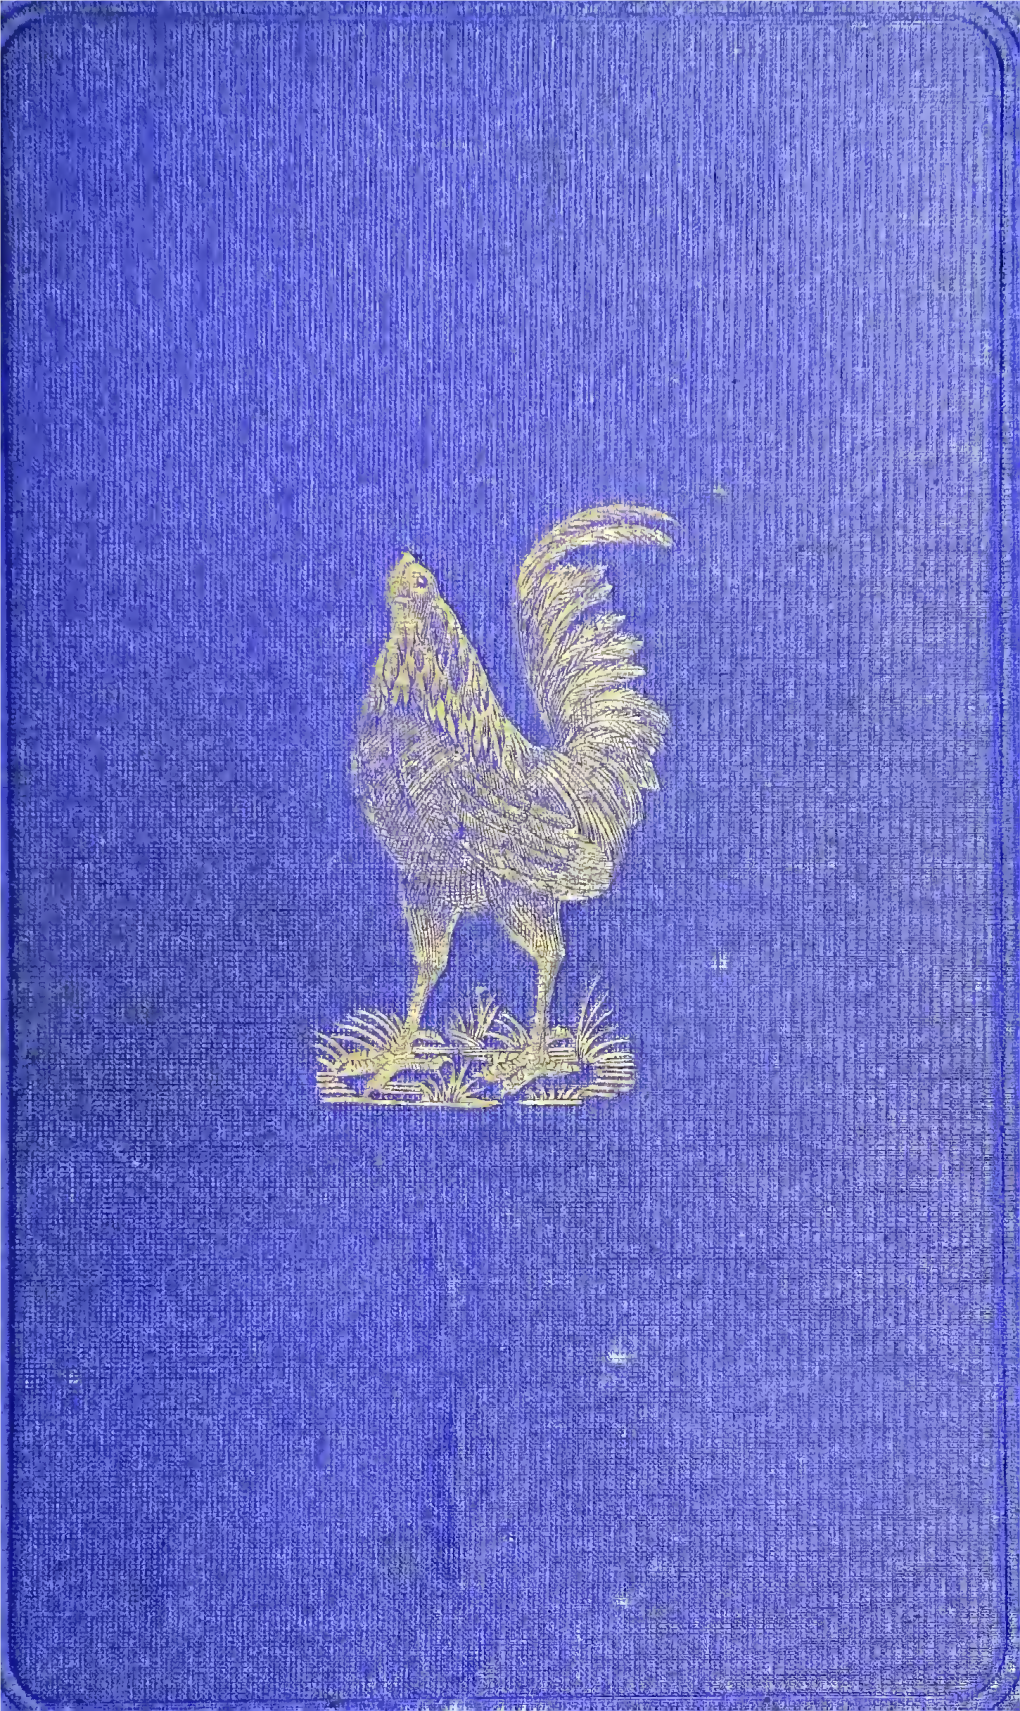 Games Fowls, Their Origin and History